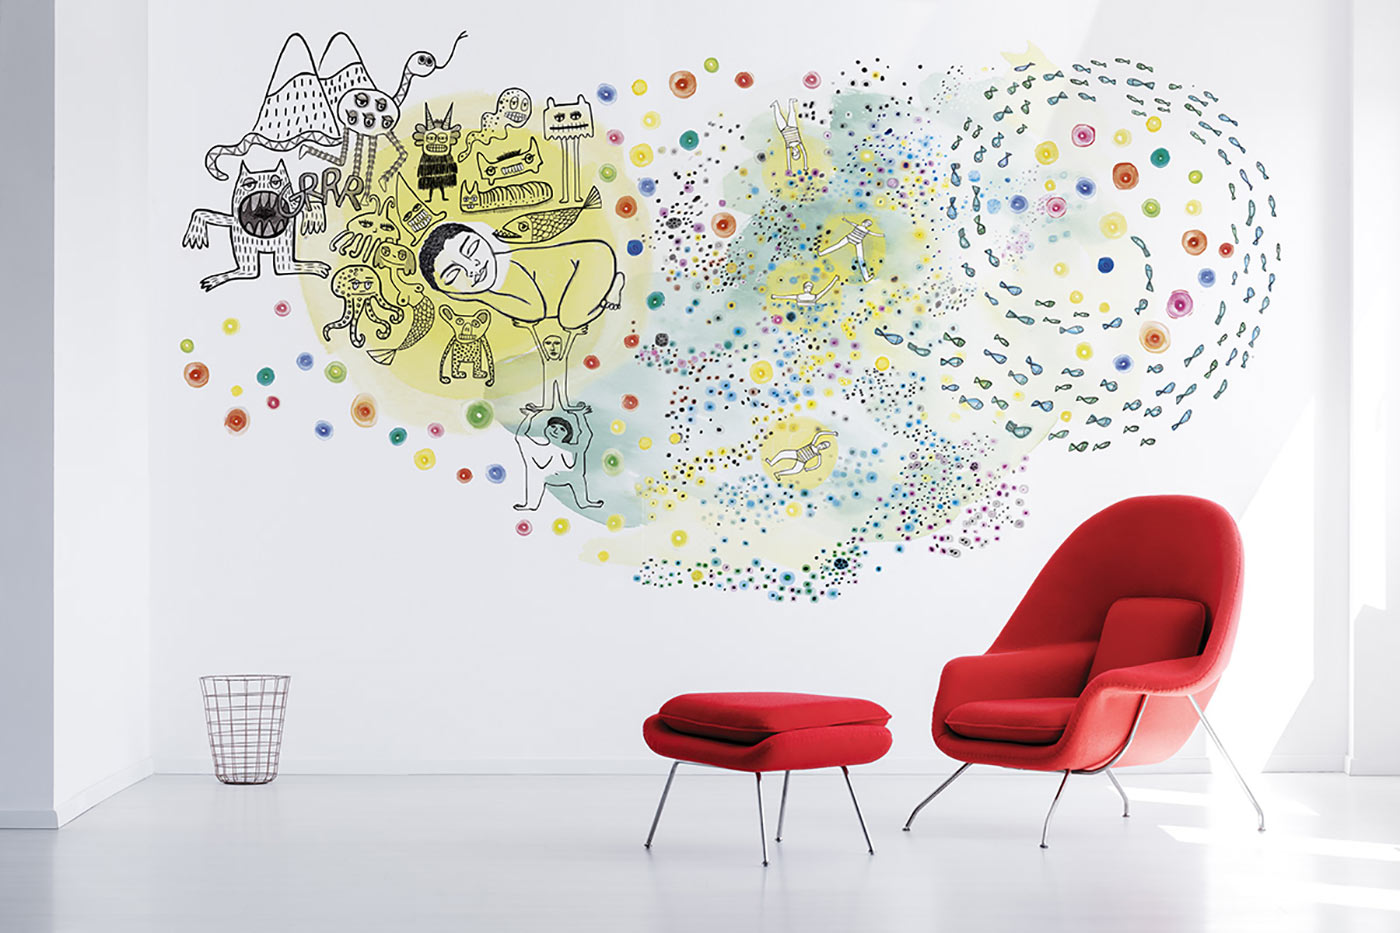 Wall painting - Therapeutic space